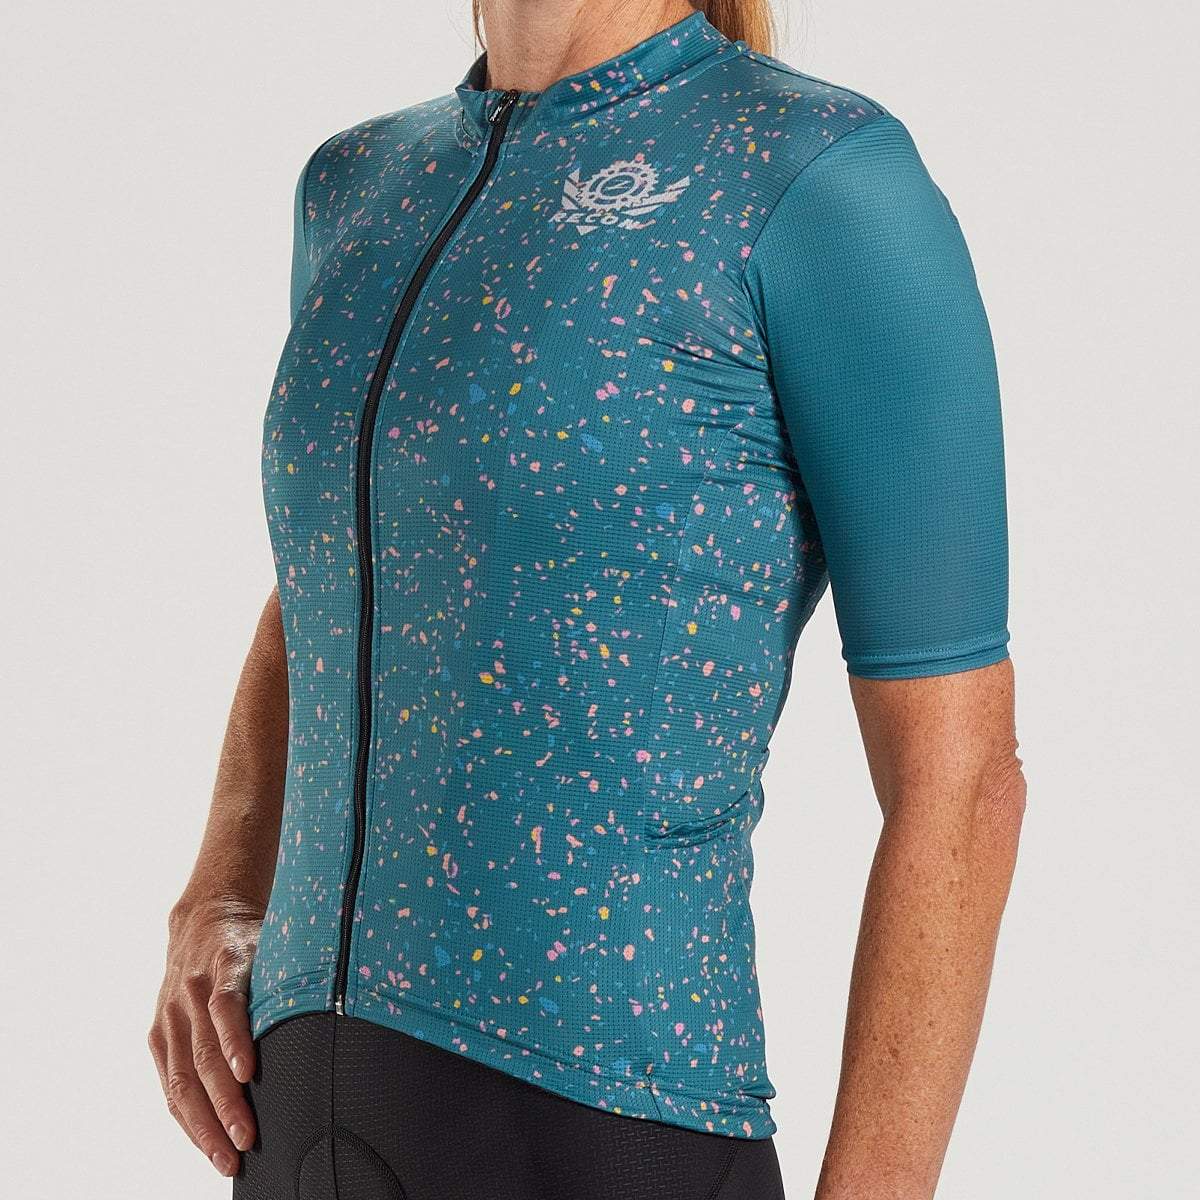 Zoot Sports CYCLE APPAREL WOMENS RECON CYCLE JERSEY - JADE